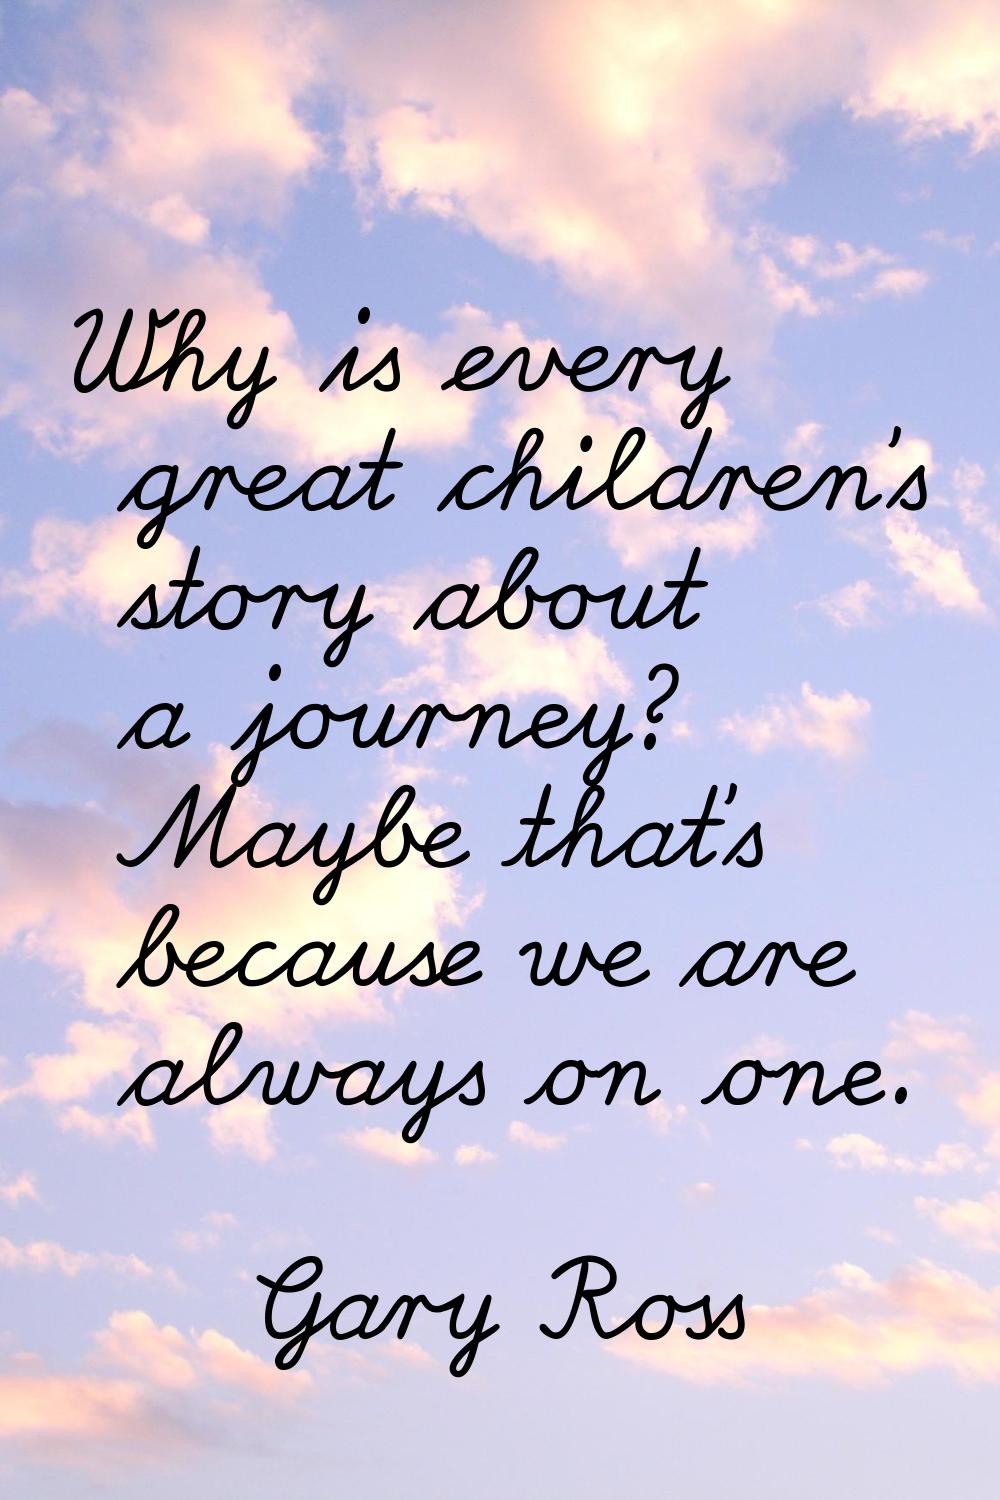 Why is every great children's story about a journey? Maybe that's because we are always on one.